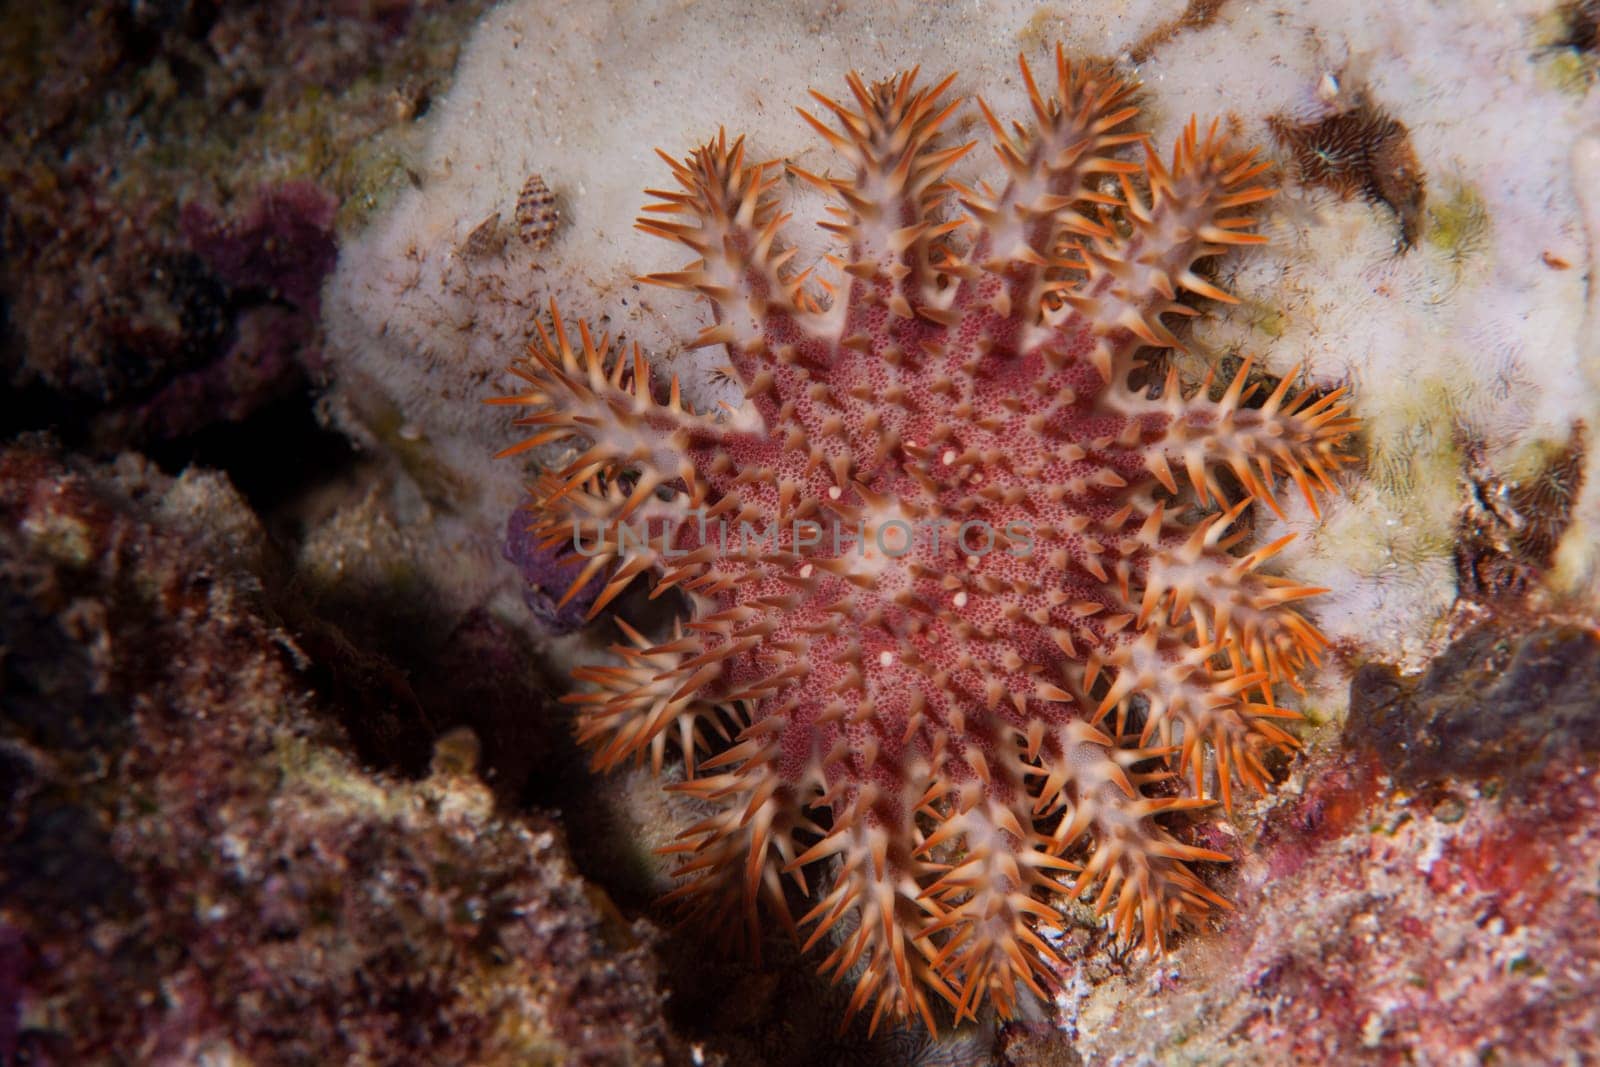 Sea star crown of thorns by AndreaIzzotti